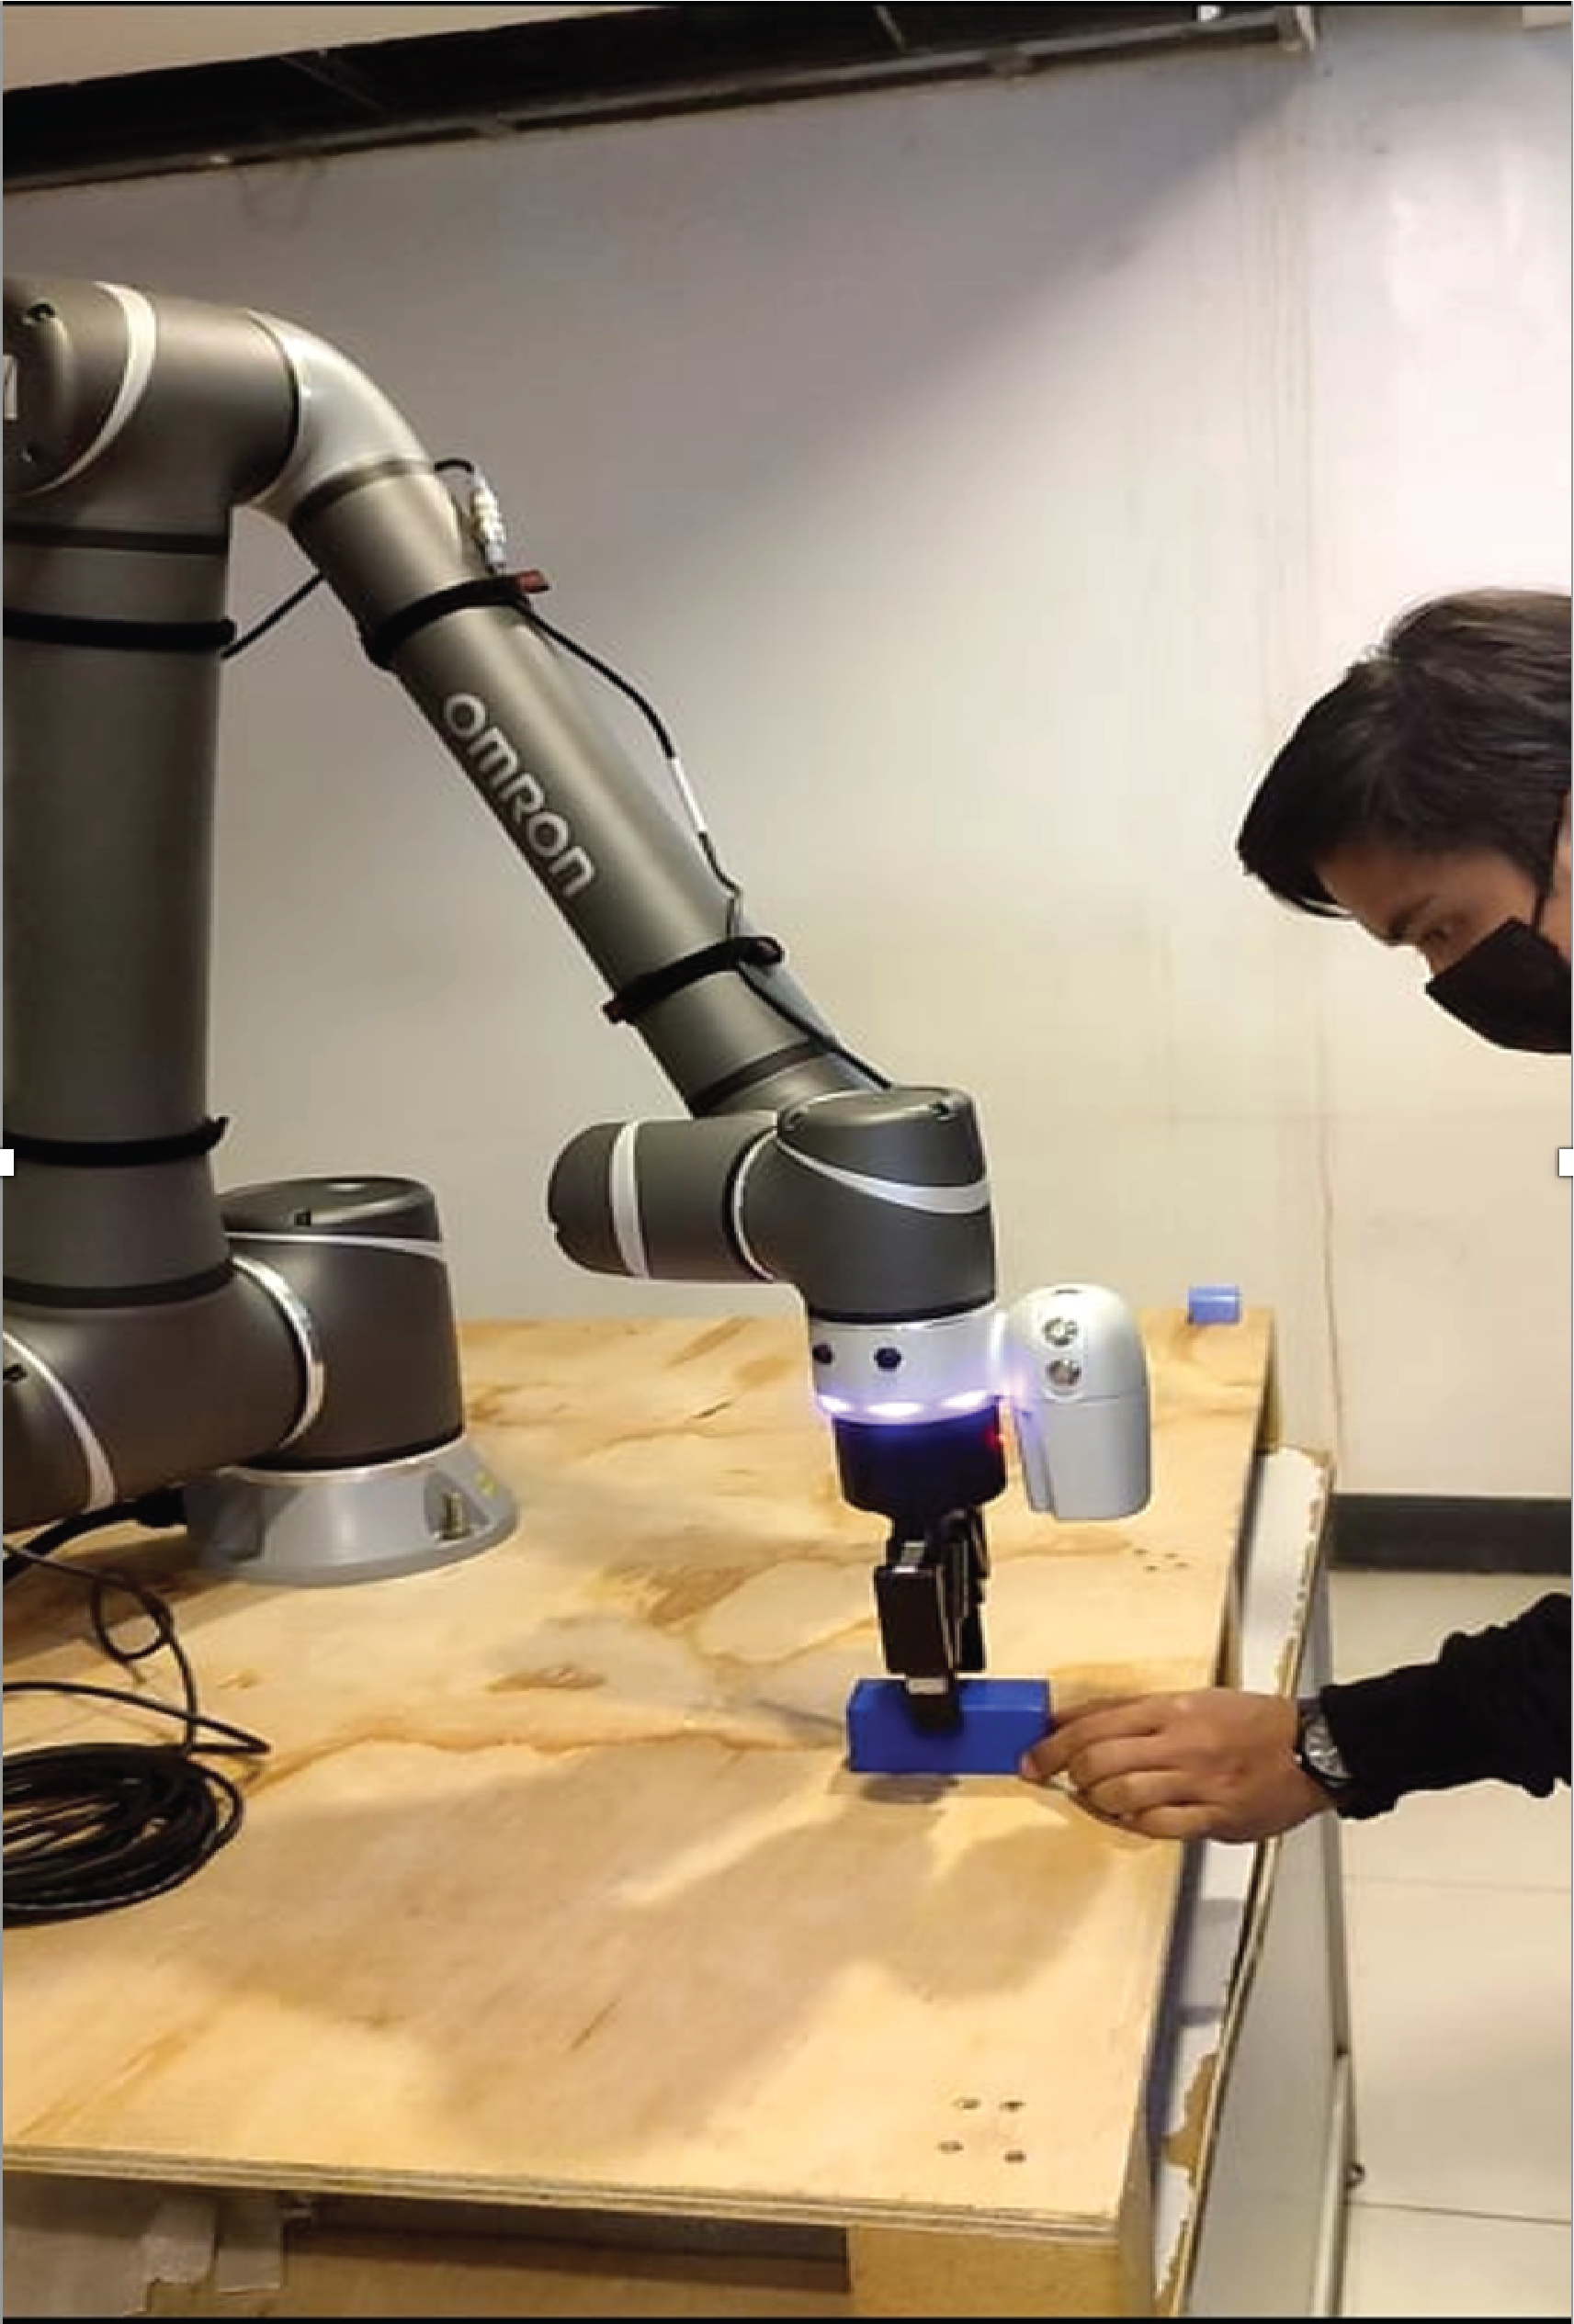 Training of Omron Collaborative Robot - Part 2